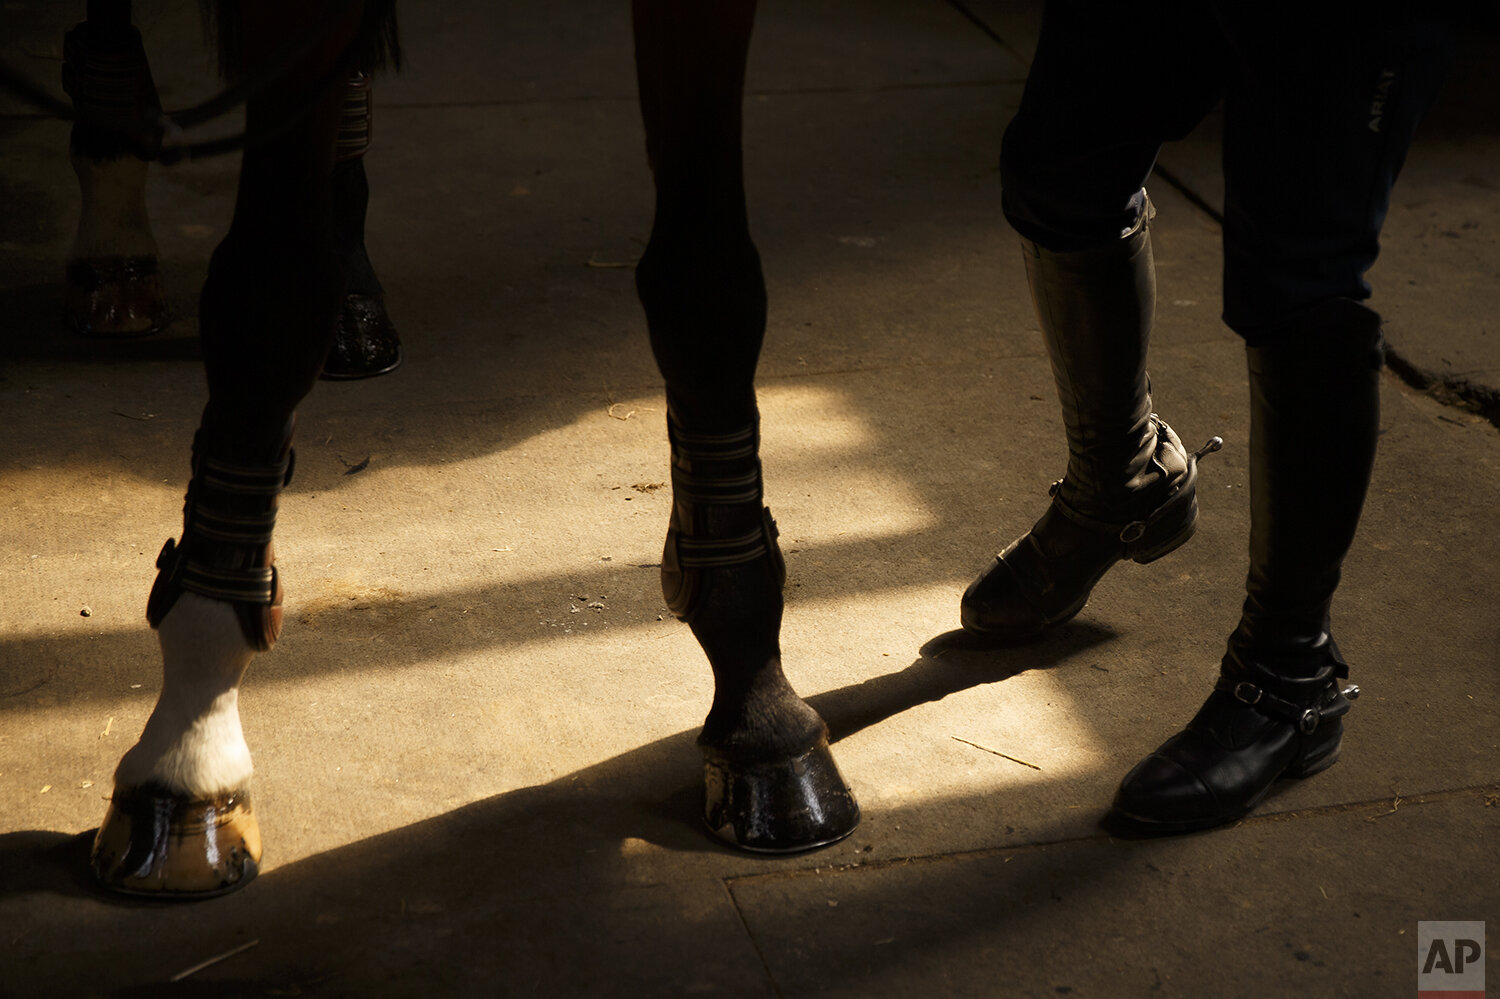  Phillip Dutton, a medal-winning equestrian on the U.S. Olympic team, prepares Fernhill Revolution  before a training session at his farm, Thursday, April 2, 2020, in West Grove, Pa. (AP Photo/Matt Slocum) 